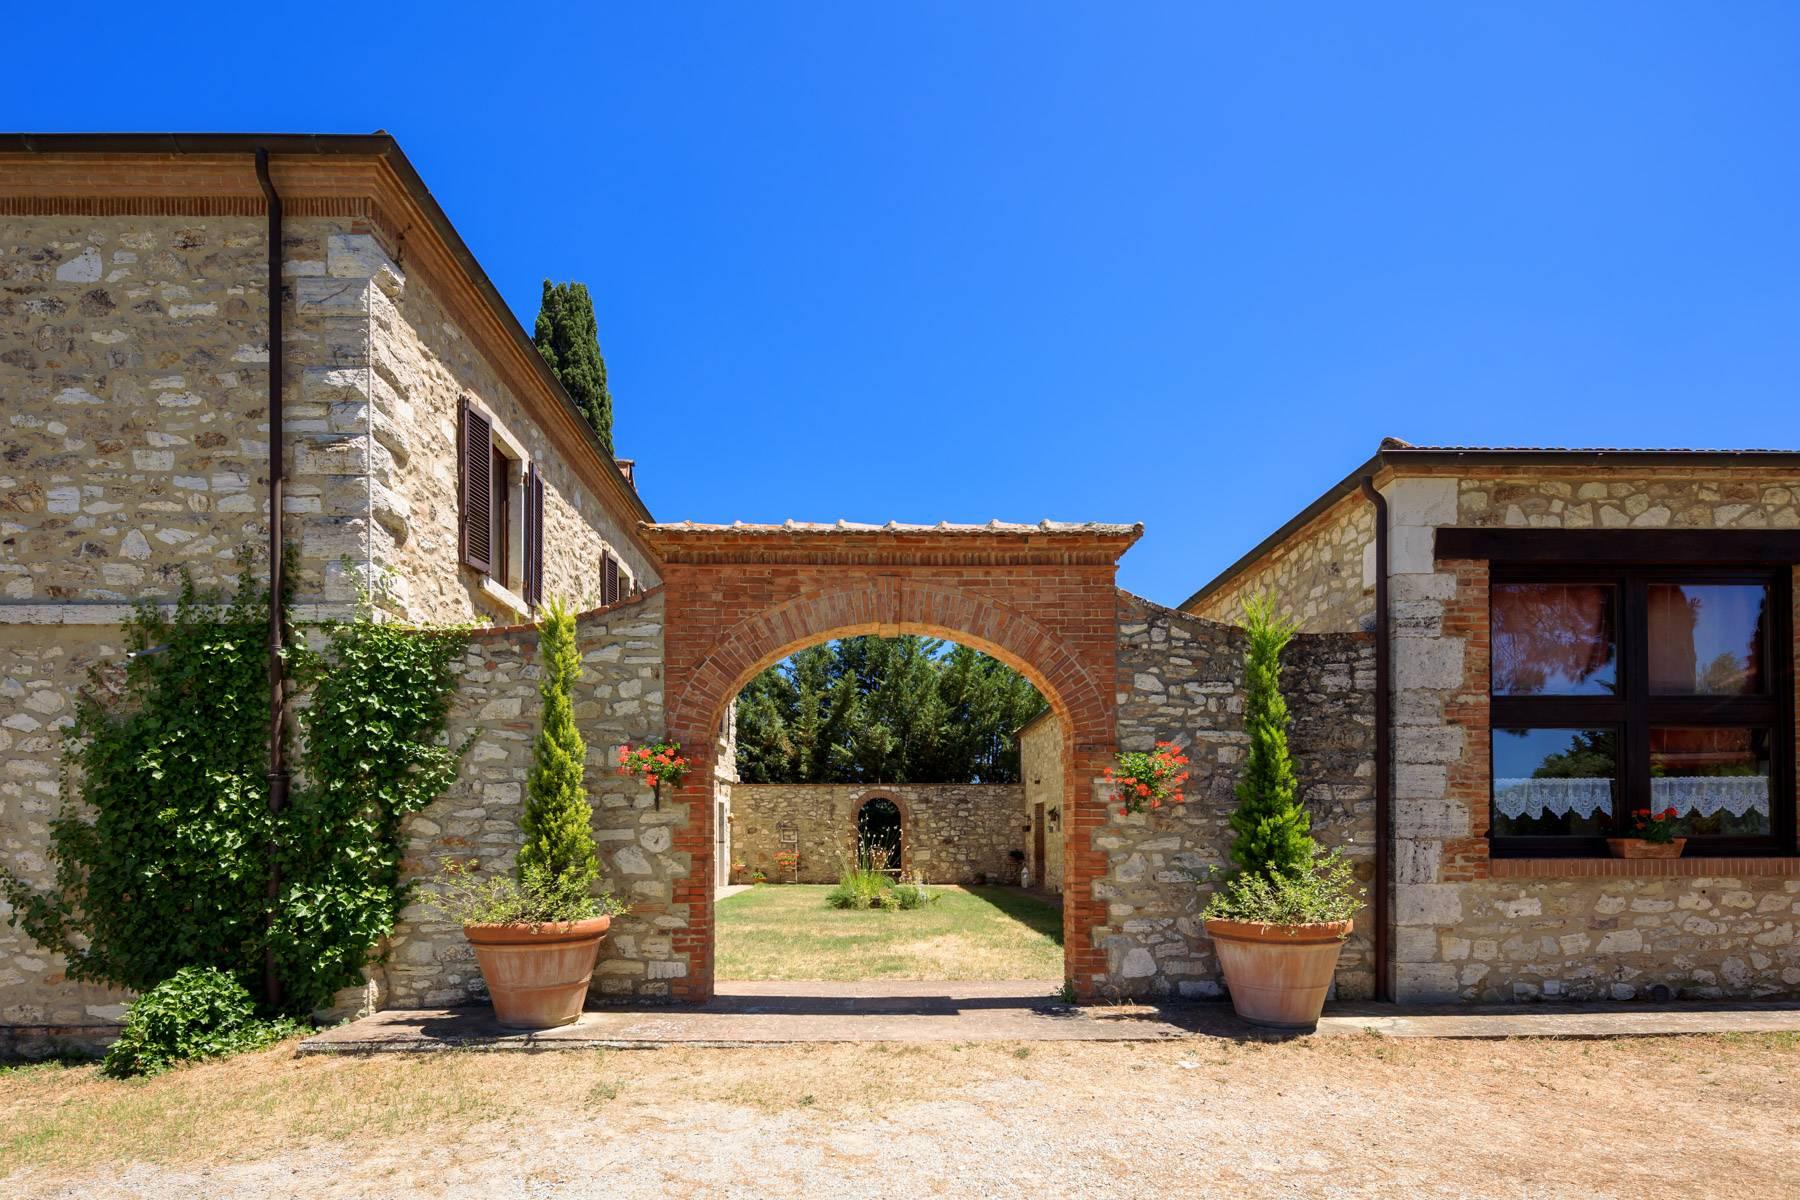 Historical country house in the heart of Crete Senesi with pool - 1